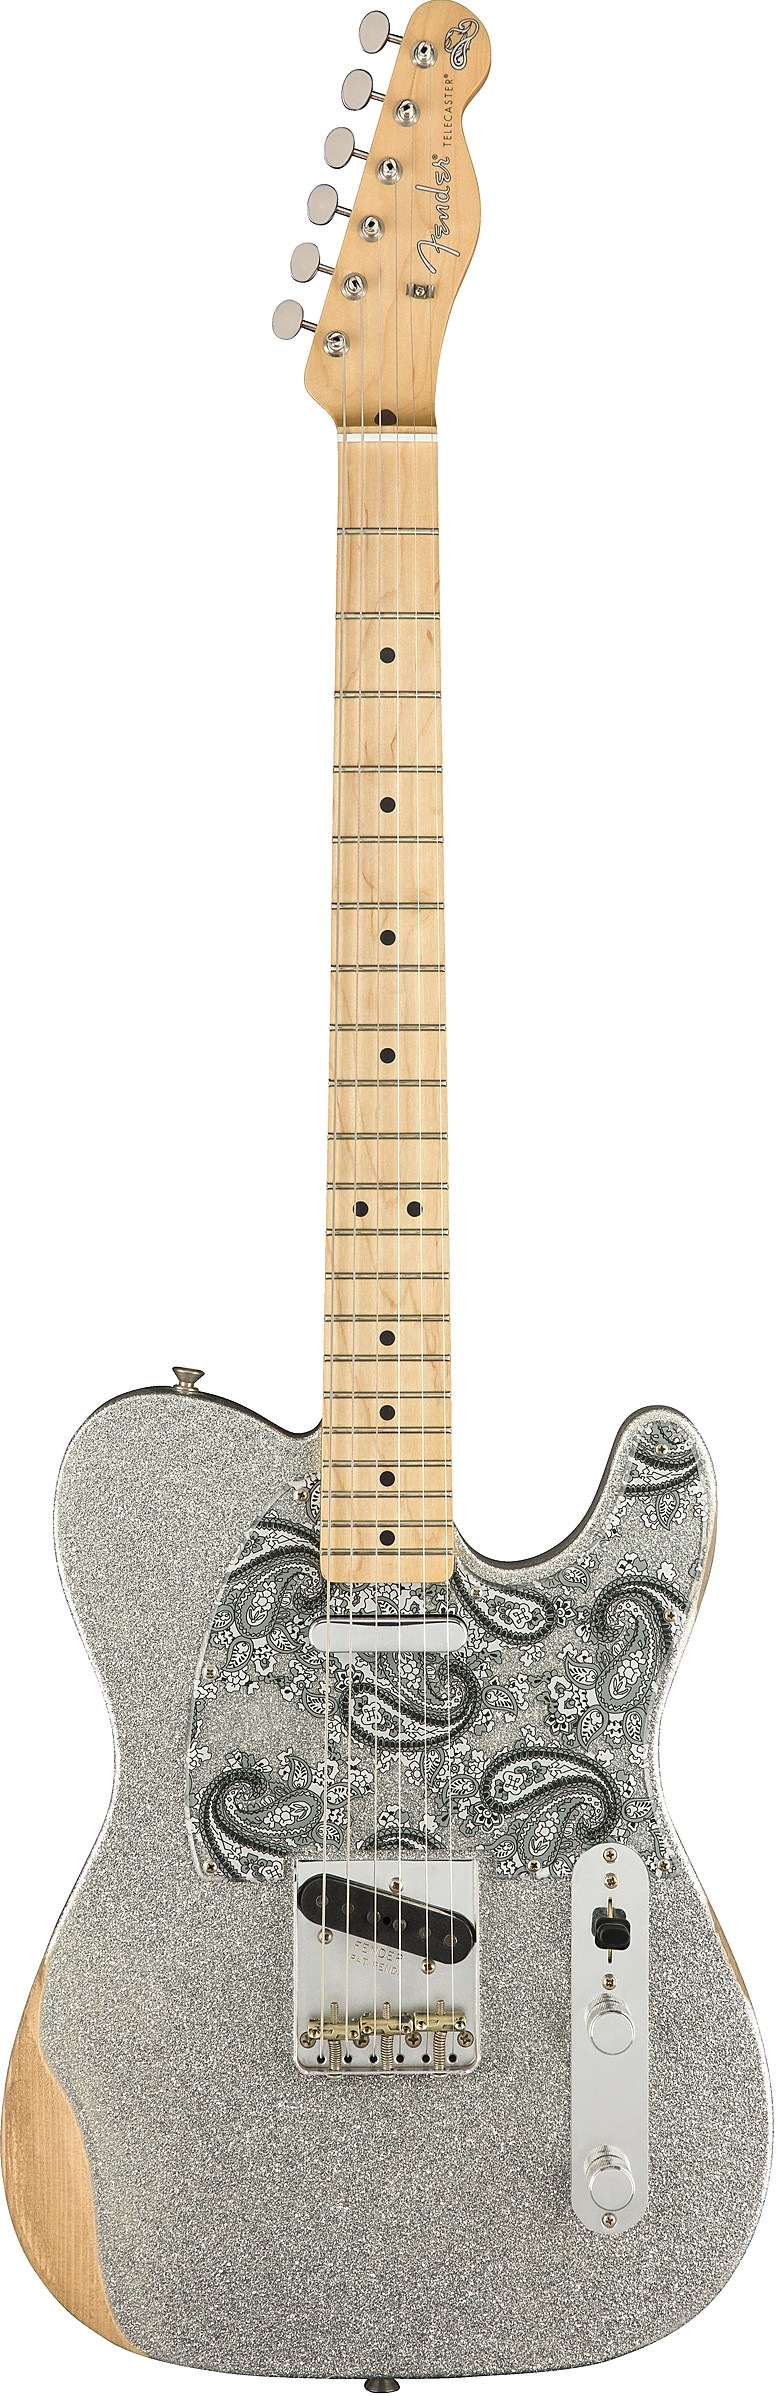 Brad Paisley Road Worn Telecaster by Fender